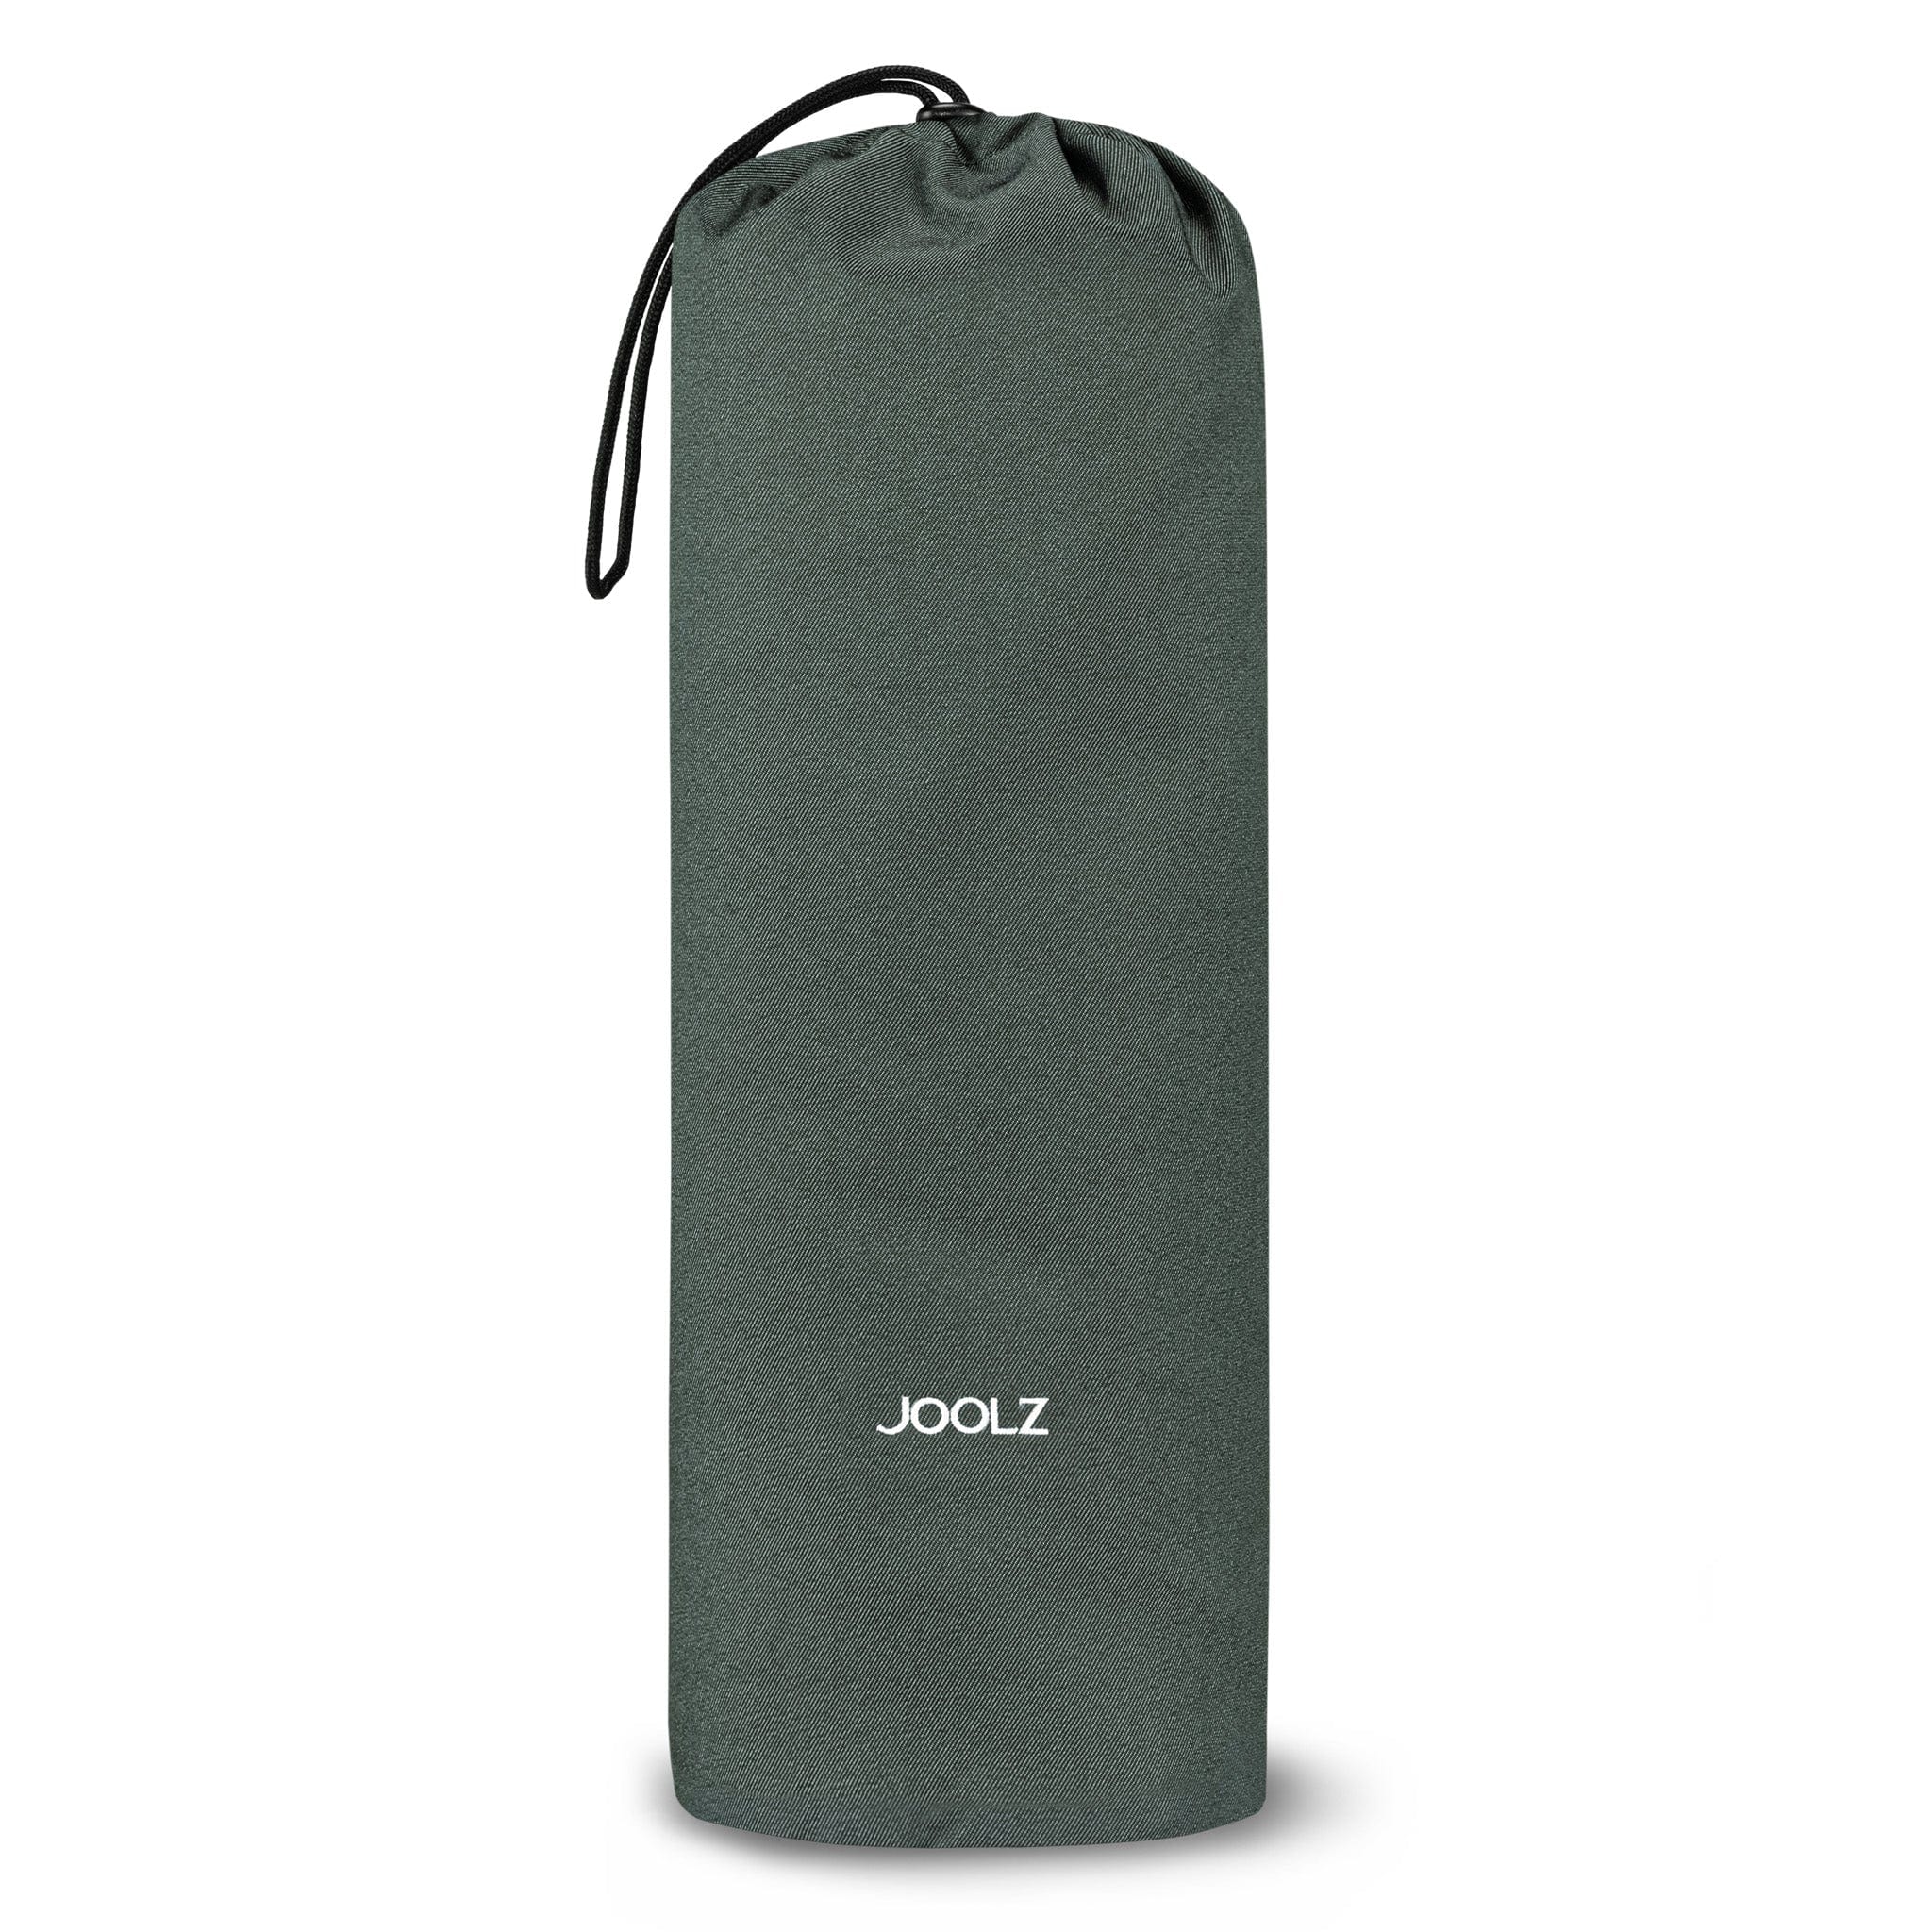 Joolz Aer Footmuff in Mighty Green Footmuffs & Liners 309022 8715688067550